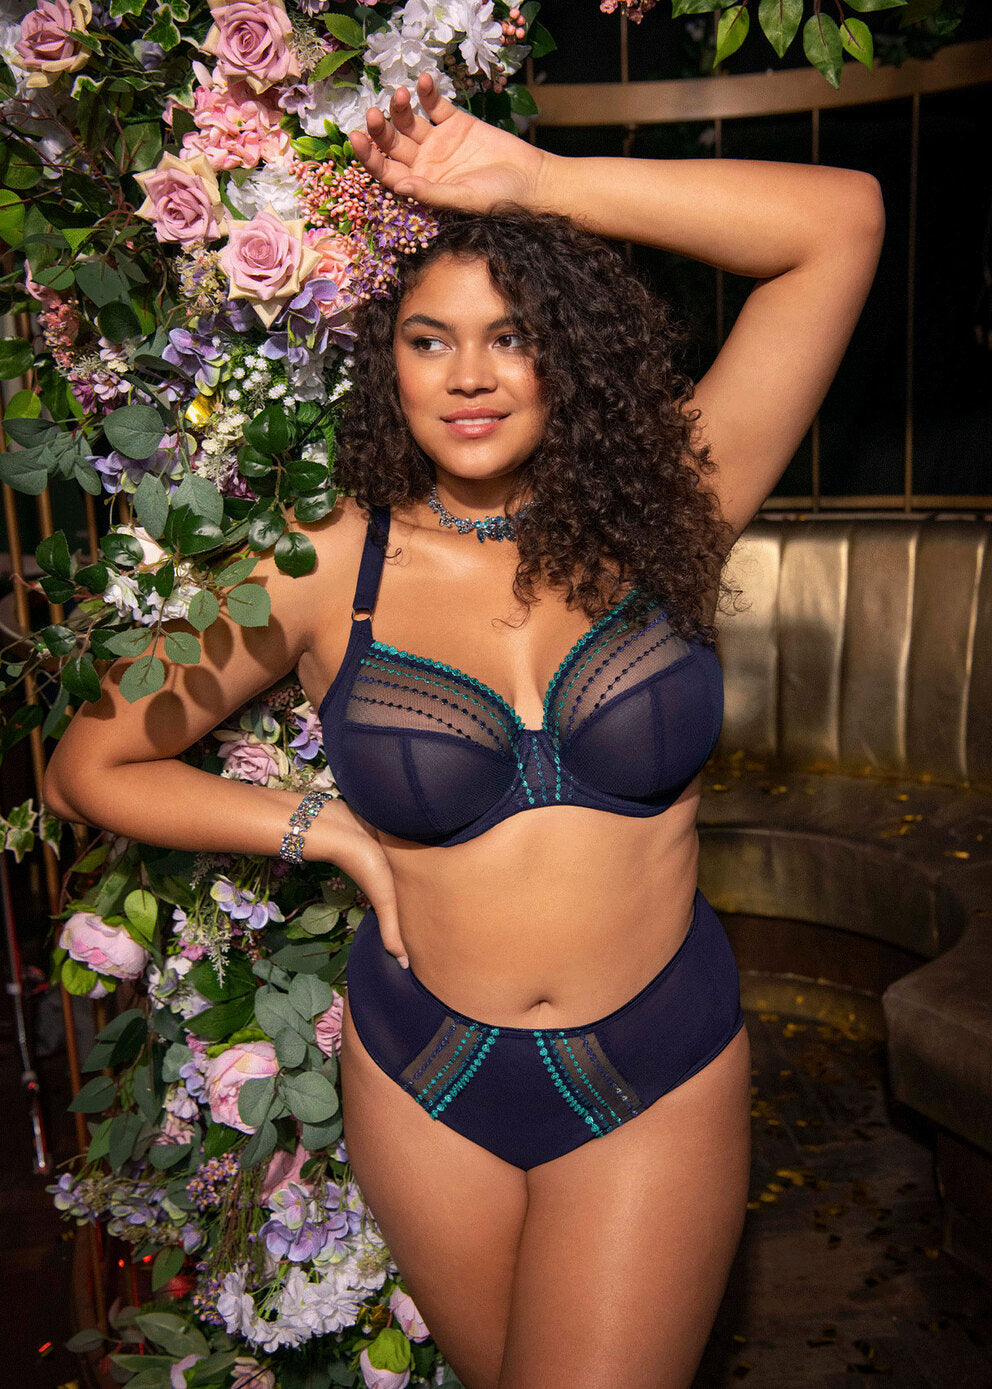 Sachi Black Butterfly Plunge Bra from Elomi